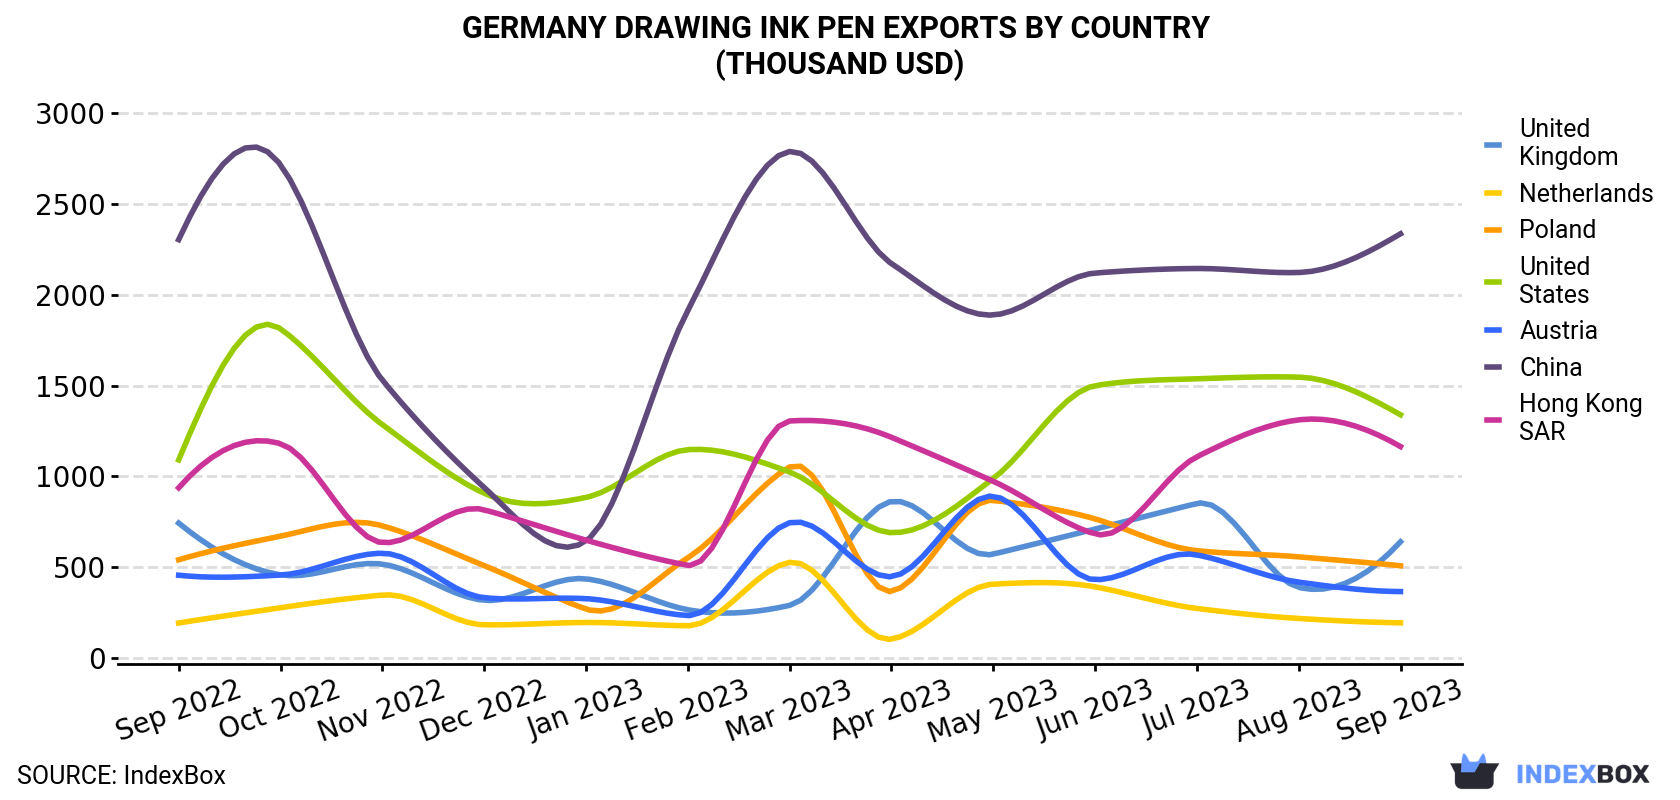 Germany Drawing Ink Pen Exports By Country (Thousand USD)